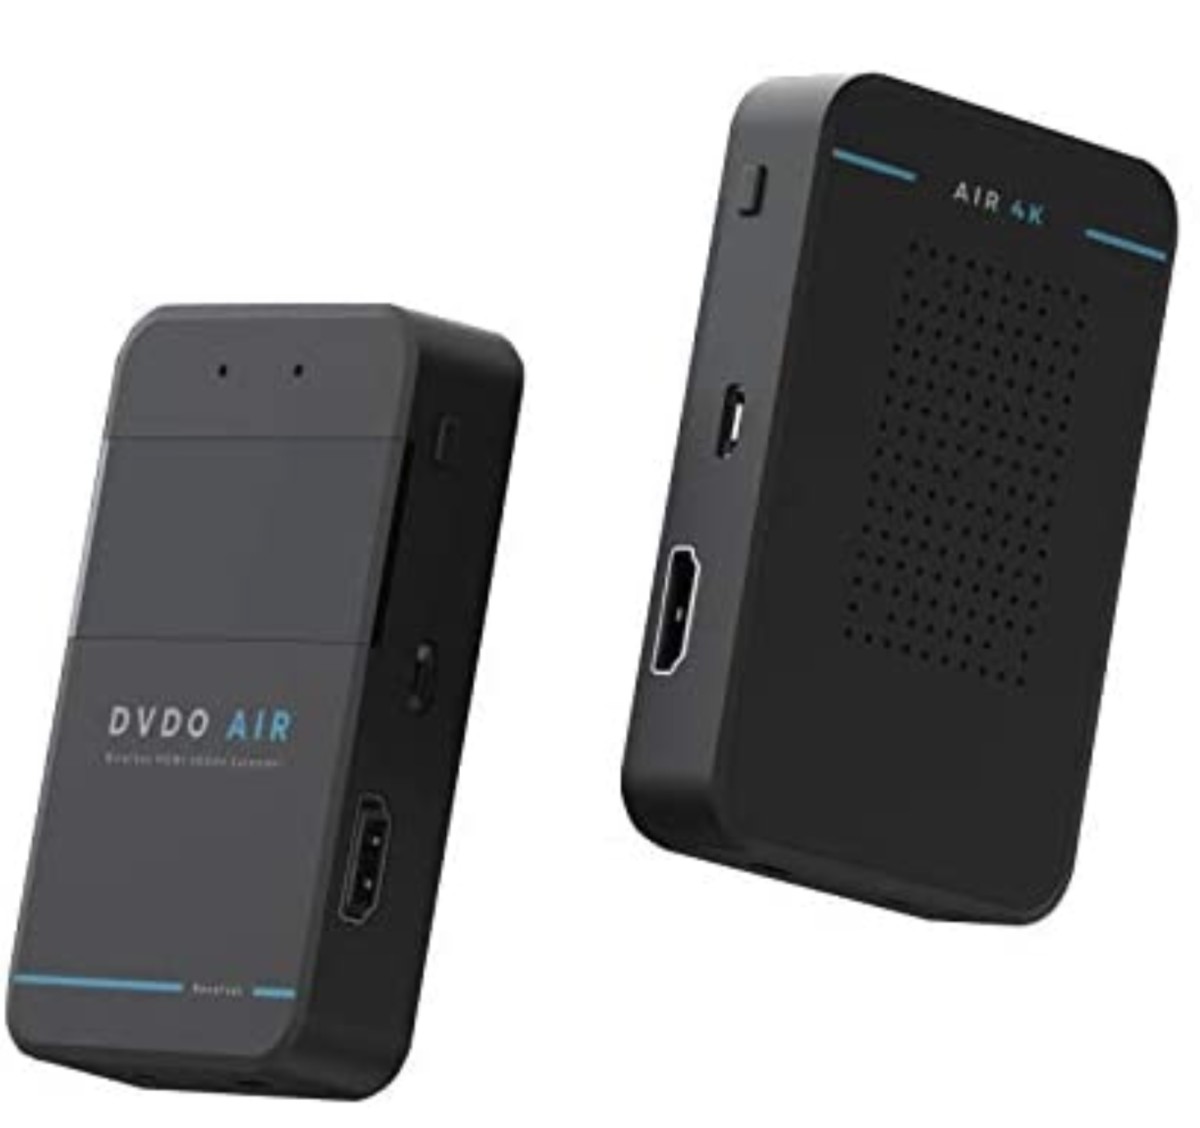 DVDO’s Air 4K Uncompressed Wireless HDMI Makes Cable Free 4K Video  Real